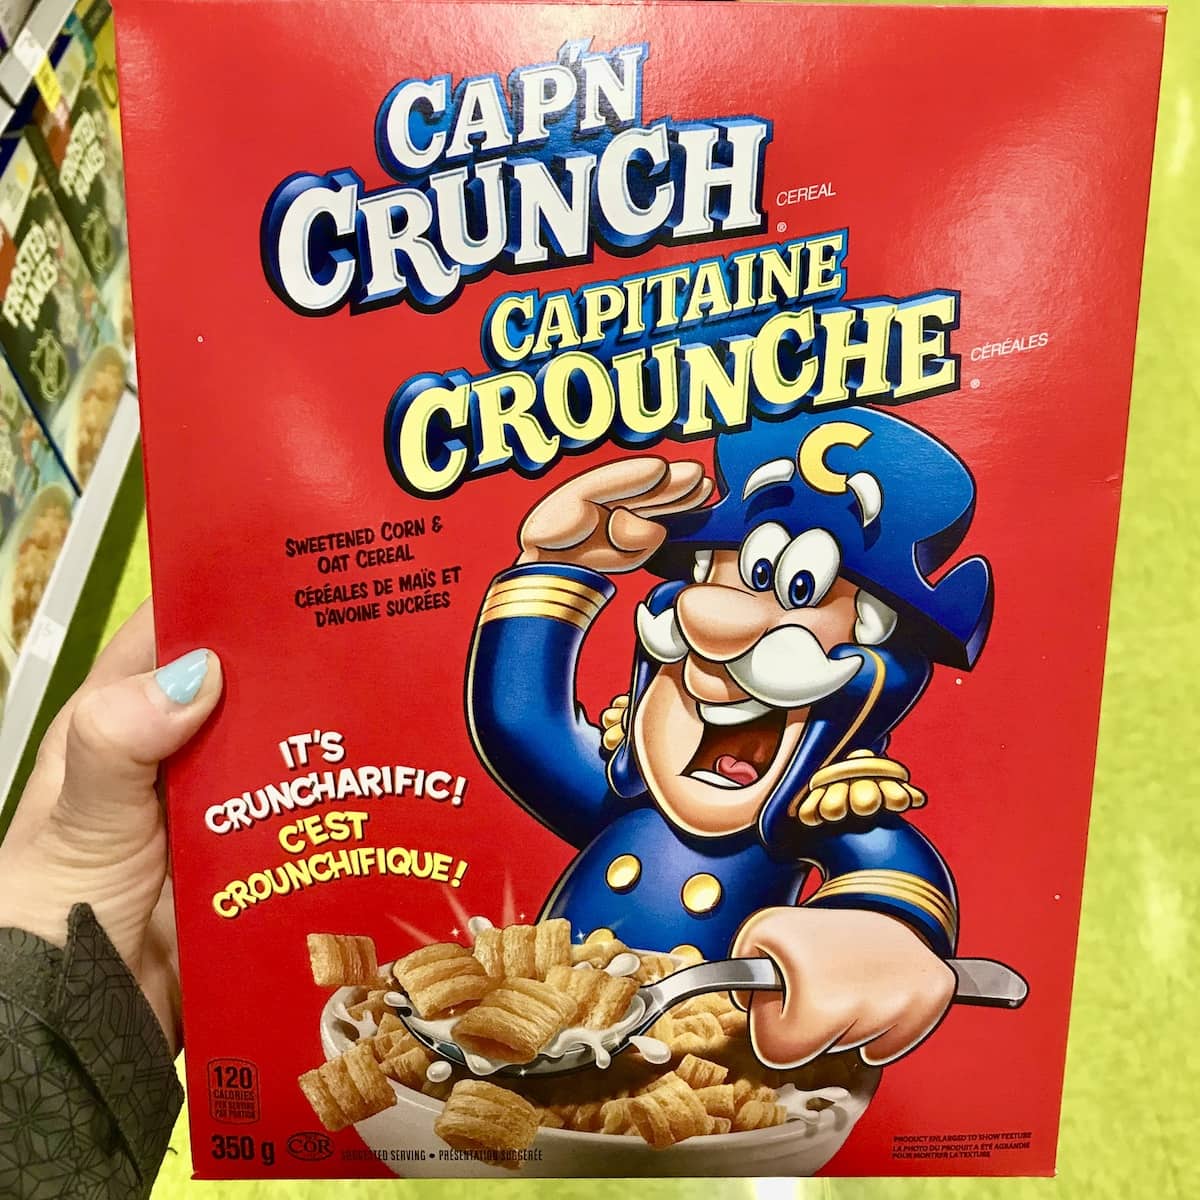 A box of Cap'n Crunch cereal.